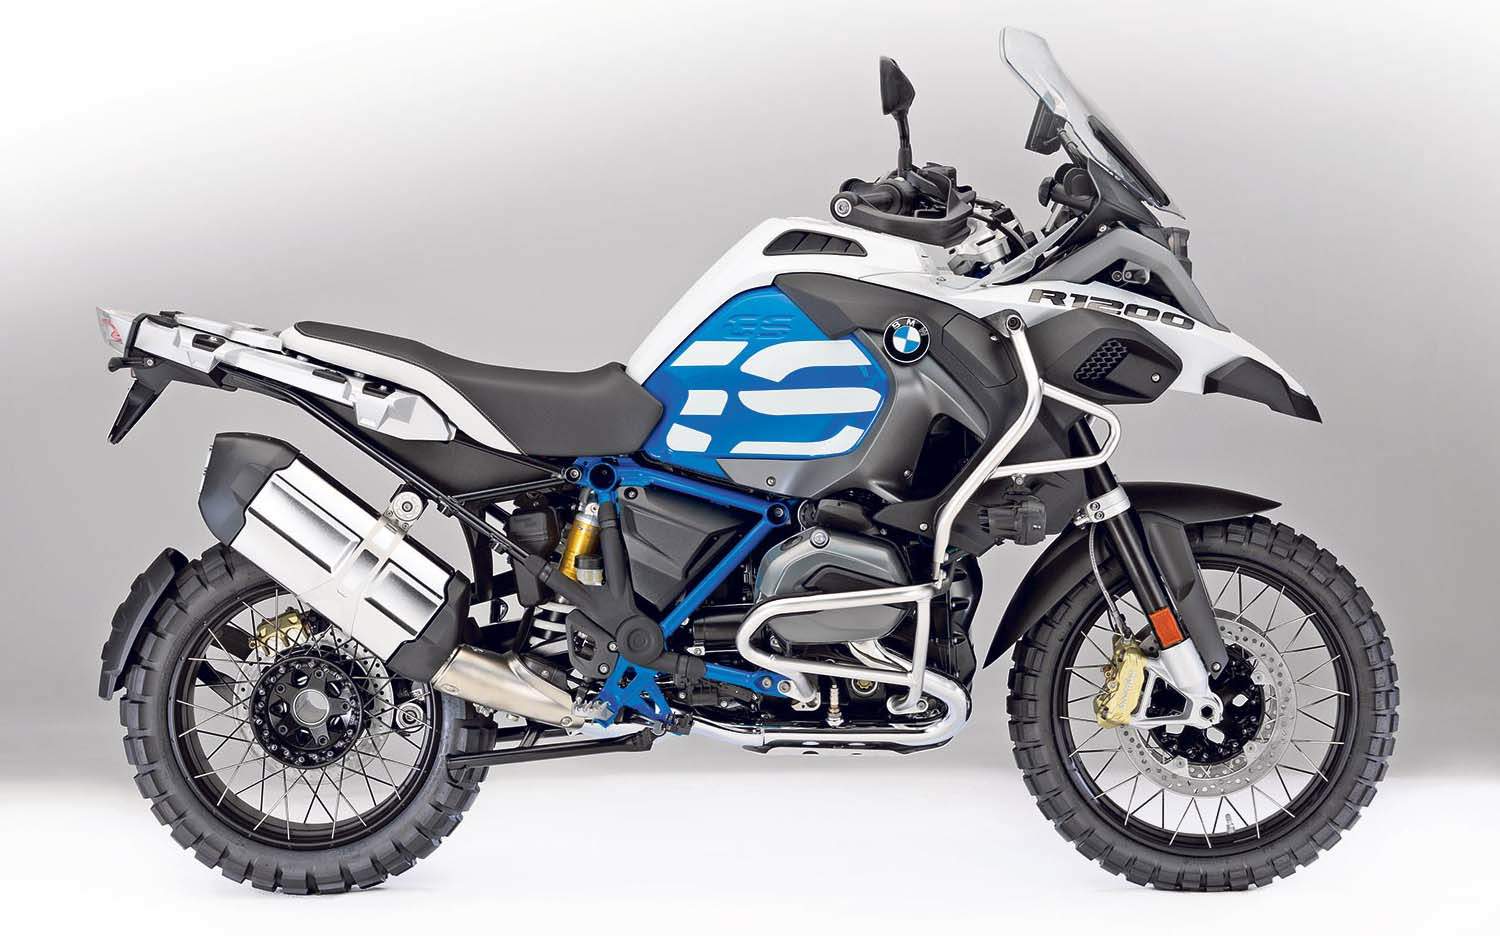 BMW R 1200GS LC Adventure (2018) technical specifications